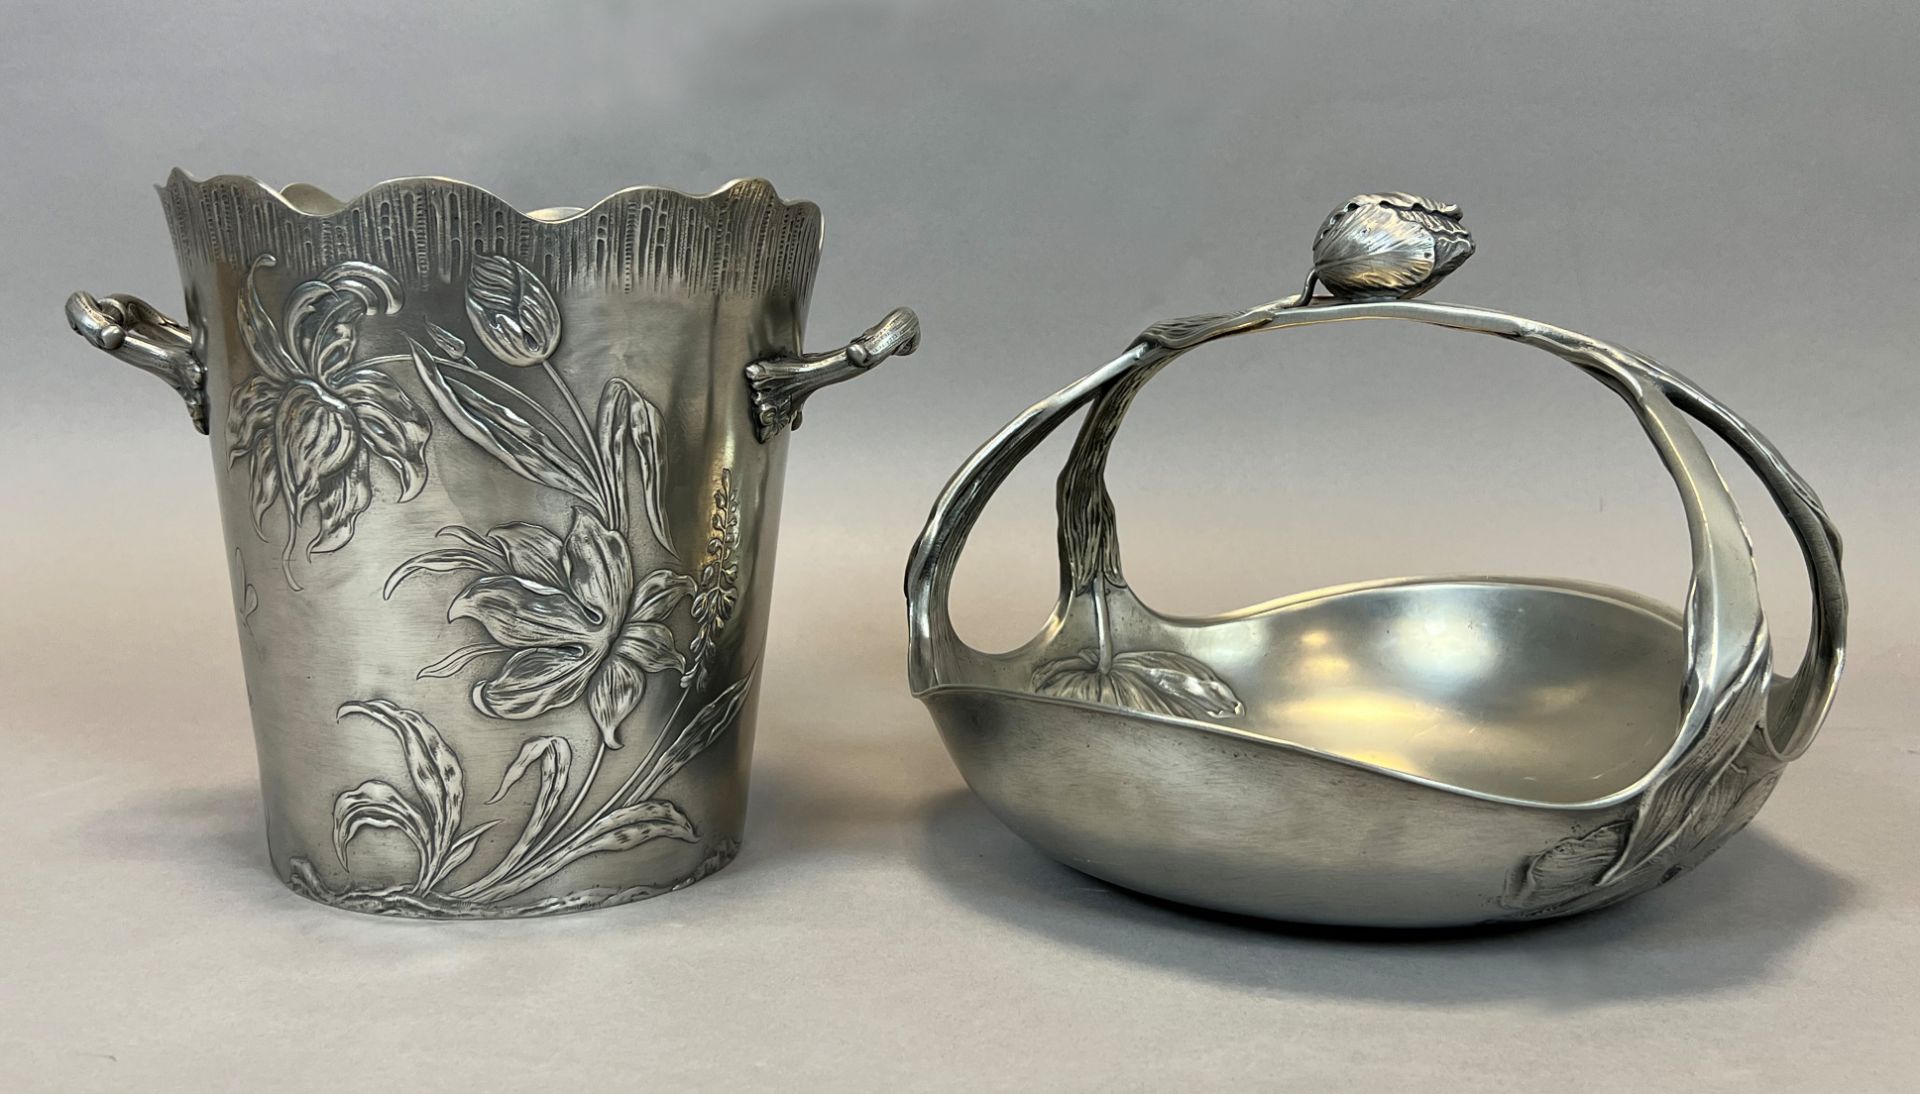 Achille GAMBA (1881 - 1944). Handle bowl and champagne cooler. Art Nouveau. Pewter.